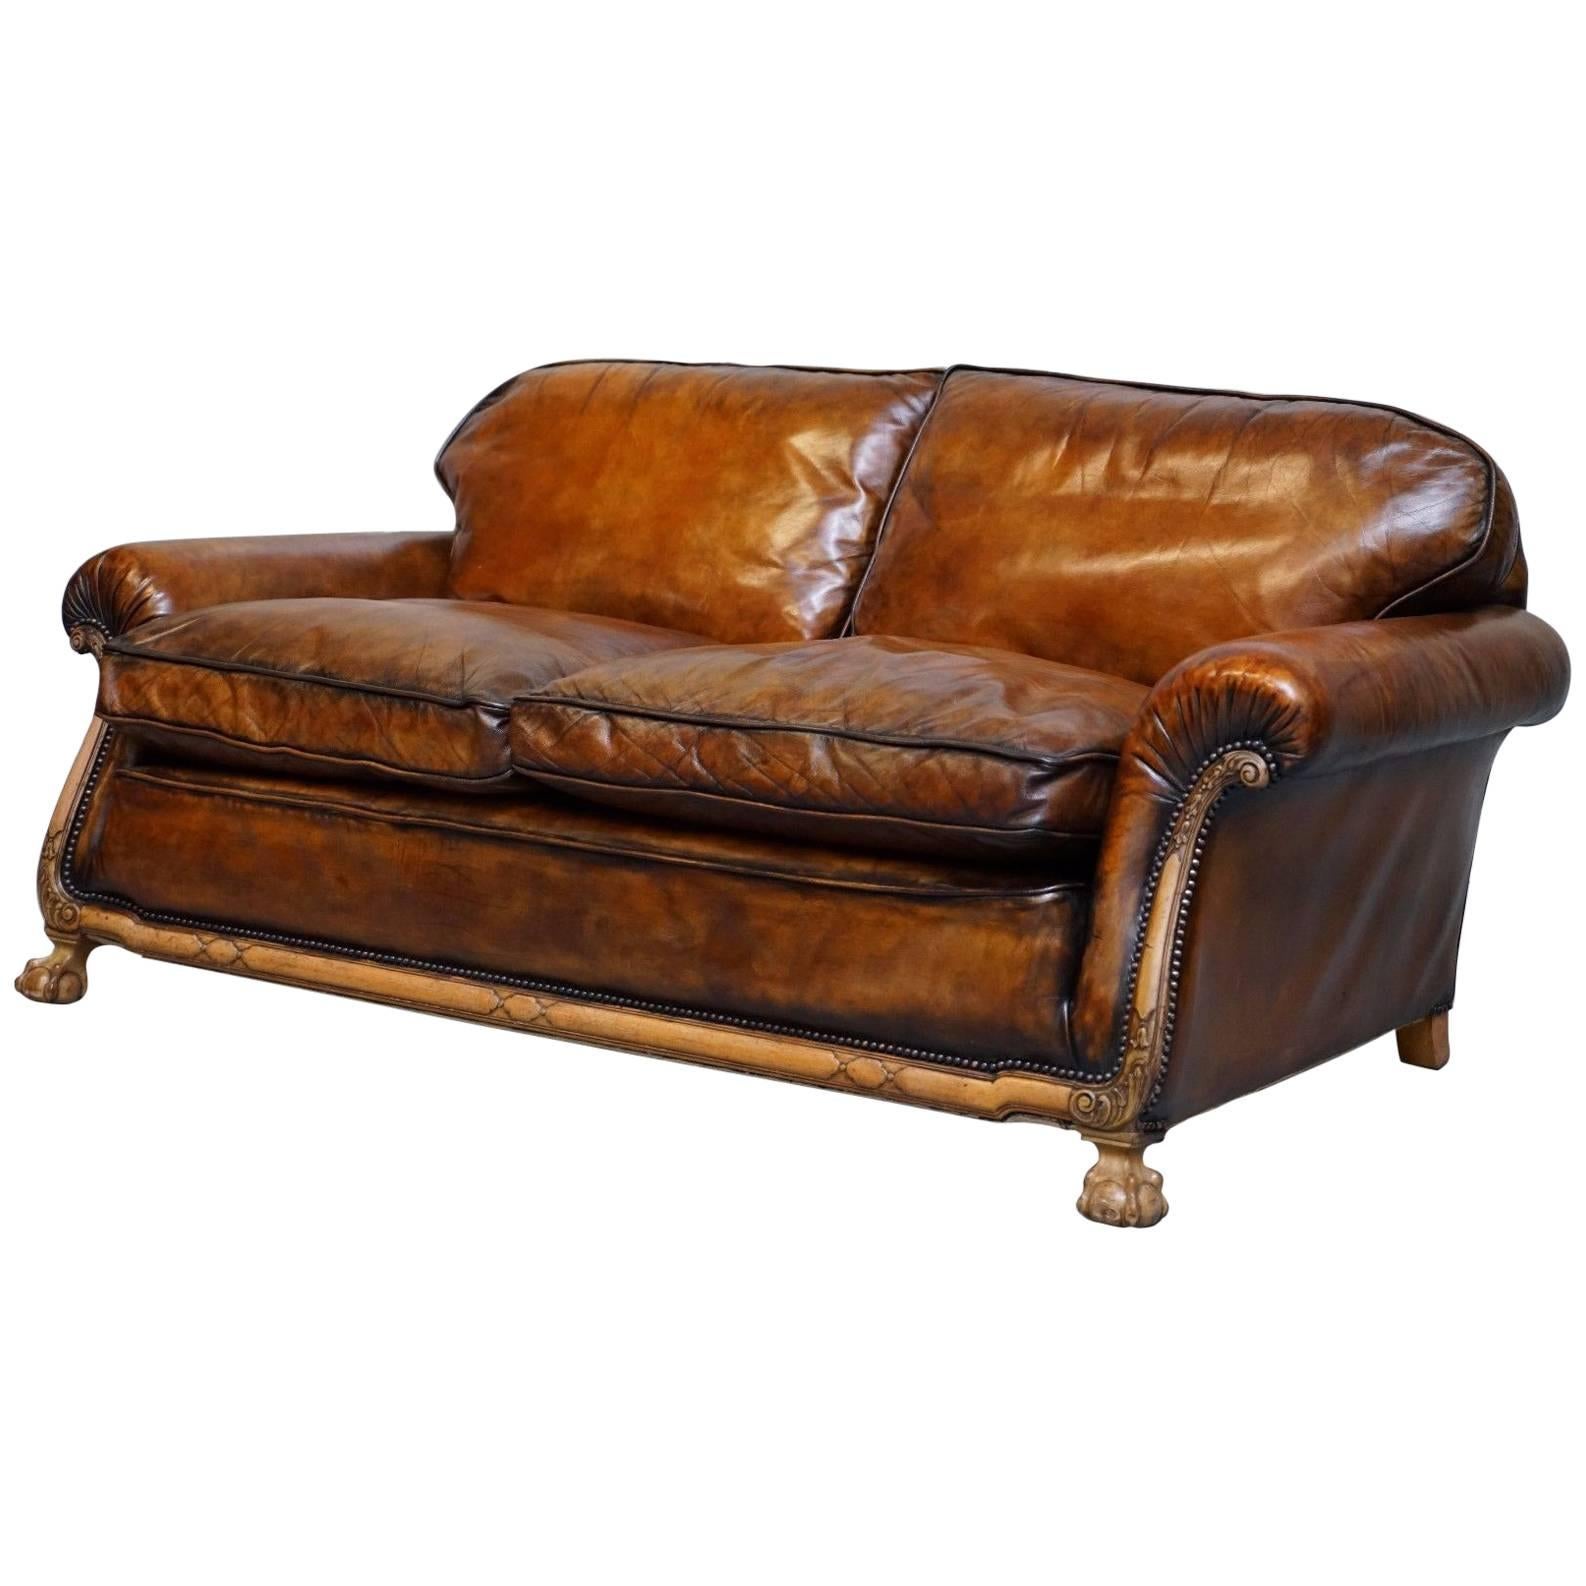 Stunning Aged Brown Leather, circa 1910 Satinwood Claw & Ball Feet Leather Sofa